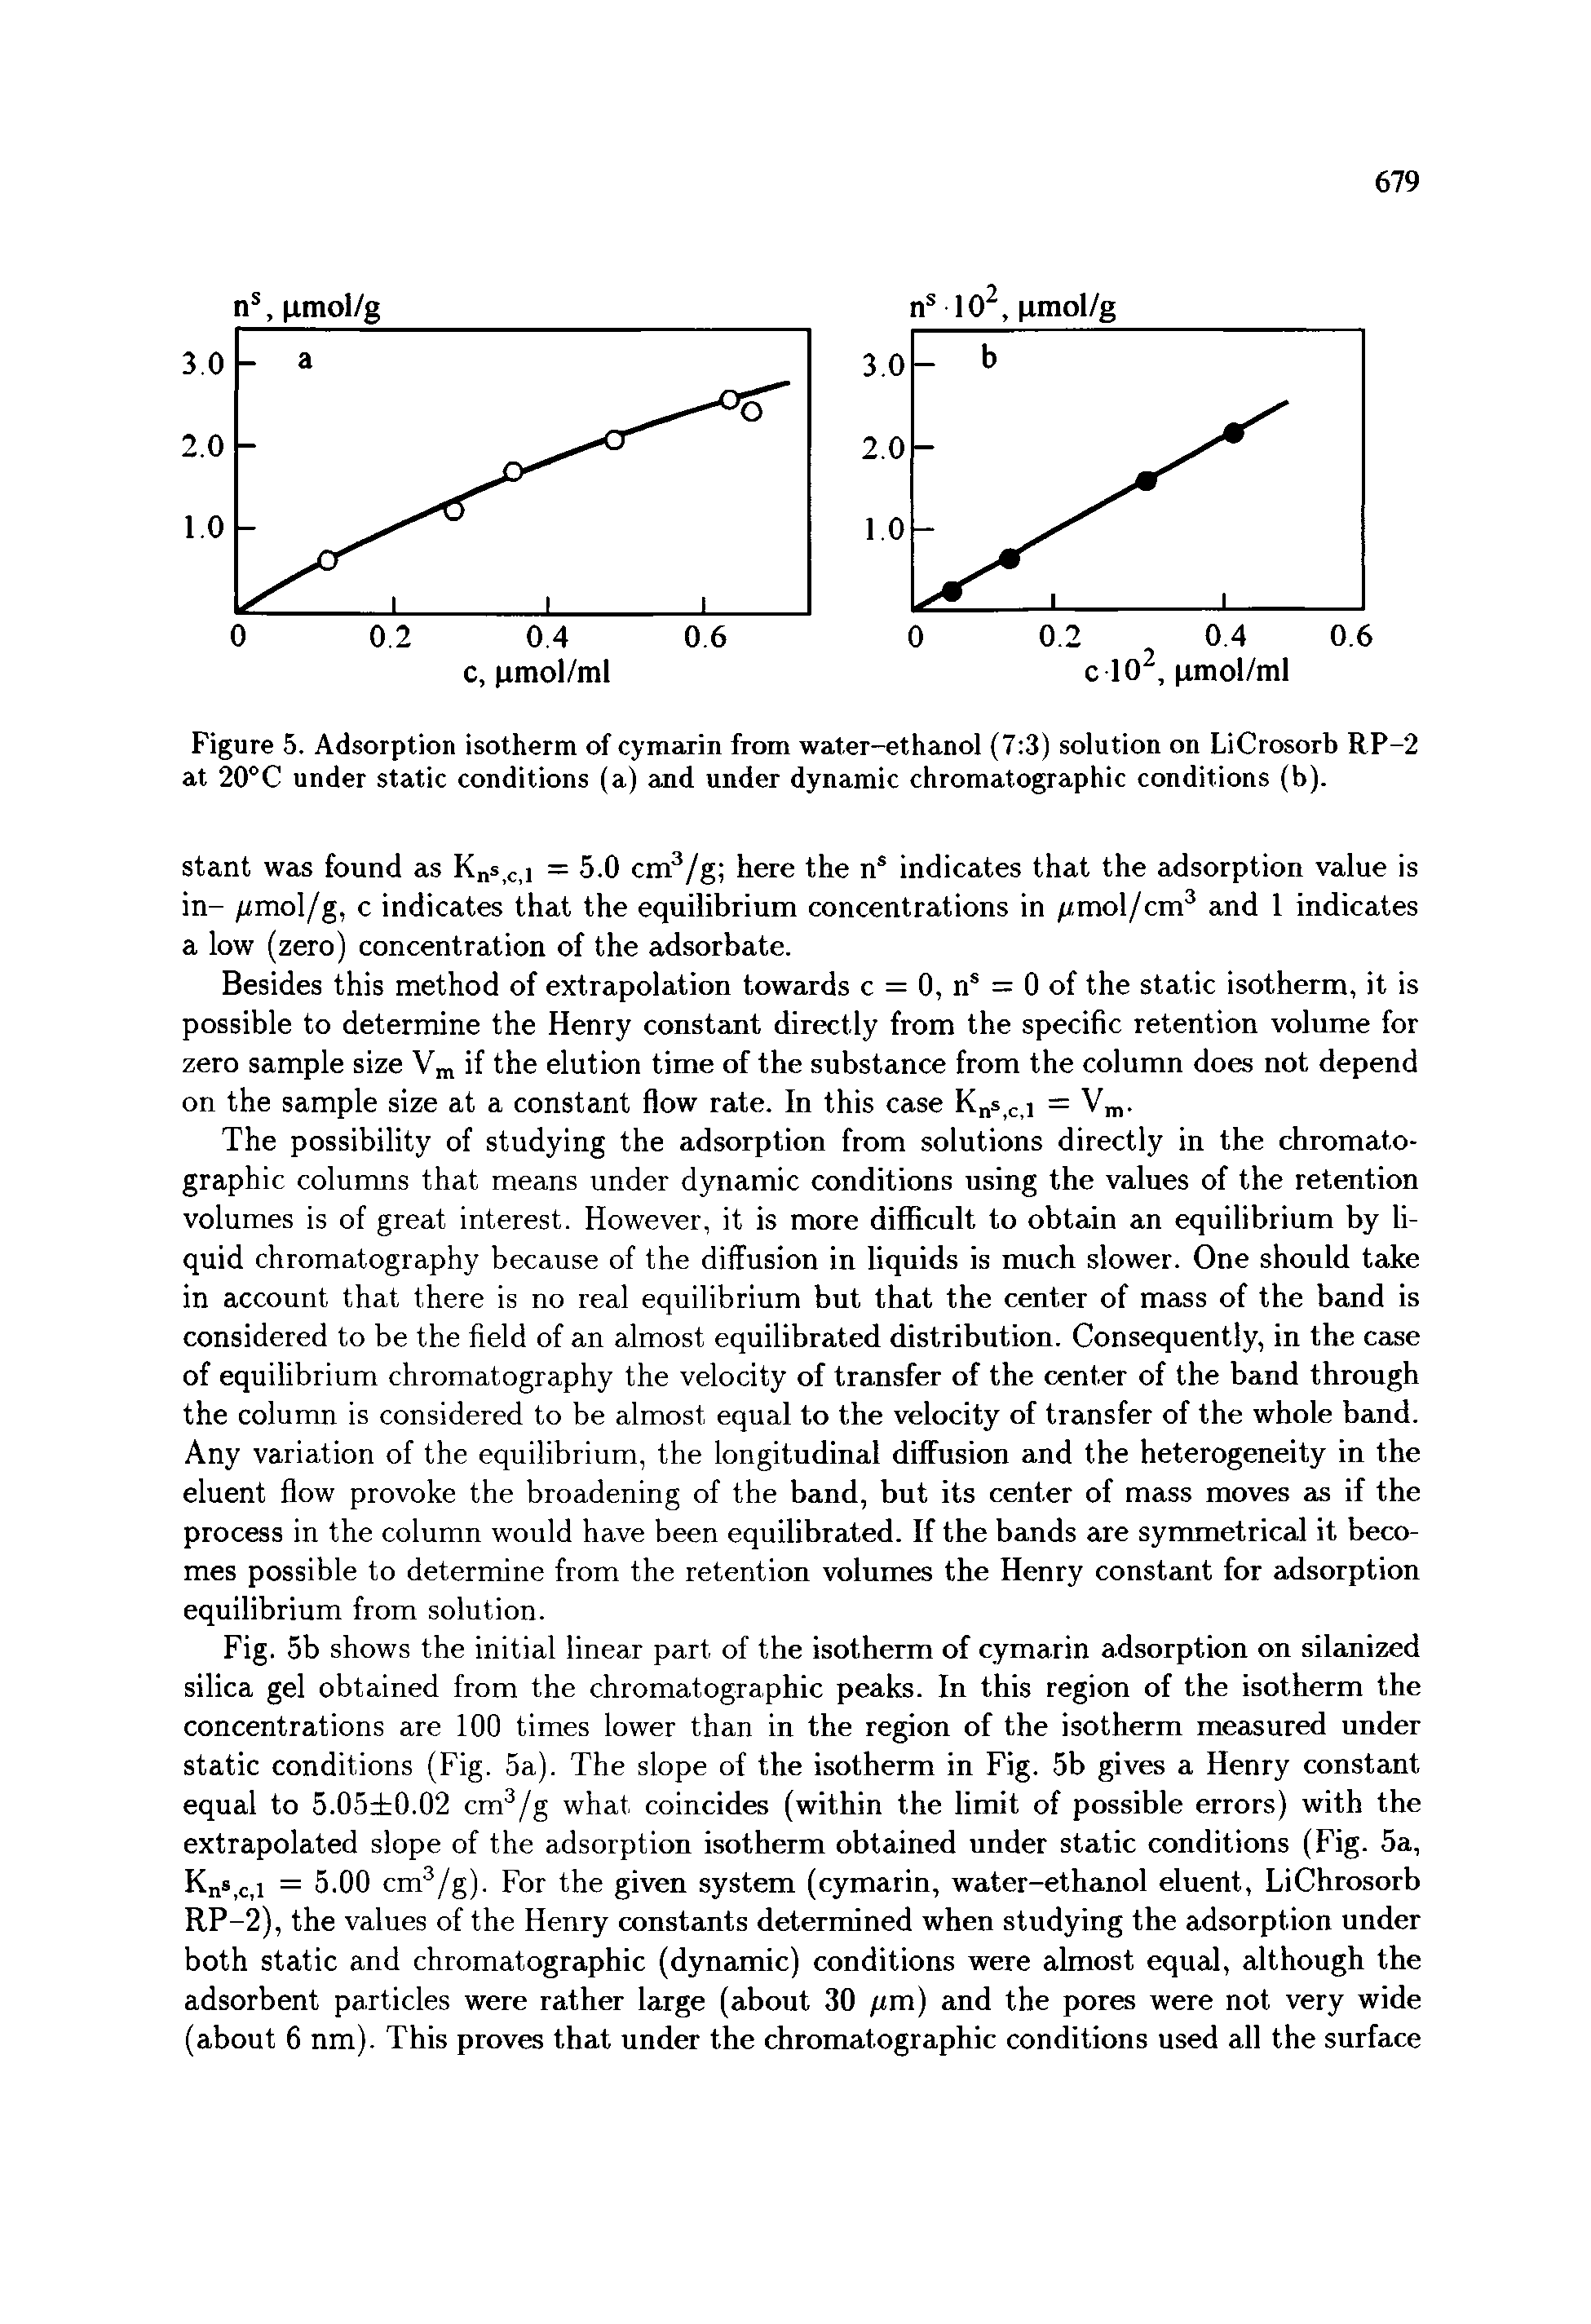 Fig. 5b shows the initial linear part of the isotherm of cymarin adsorption on silanized silica gel obtained from the chromatographic peaks. In this region of the isotherm the concentrations are 100 times lower than in the region of the isotherm measured under static conditions (Fig. 5a). The slope of the isotherm in Fig. 5b gives a Henry constant equal to 5.05 0.02 cm /g what coincides (within the limit of possible errors) with the extrapolated slope of the adsorption isotherm obtained under static conditions (Fig. 5a, Kns,c,i = 5.00 cm /g). For the given system (cymarin, water-ethanol eluent, LiChrosorb RP-2), the values of the Henry constants determined when studying the adsorption under both static and chromatographic (dynamic) conditions were almost equal, although the adsorbent particles were rather large (about 30 fim) and the pores were not very wide (about 6 nm). This proves that under the chromatographic conditions used all the surface...